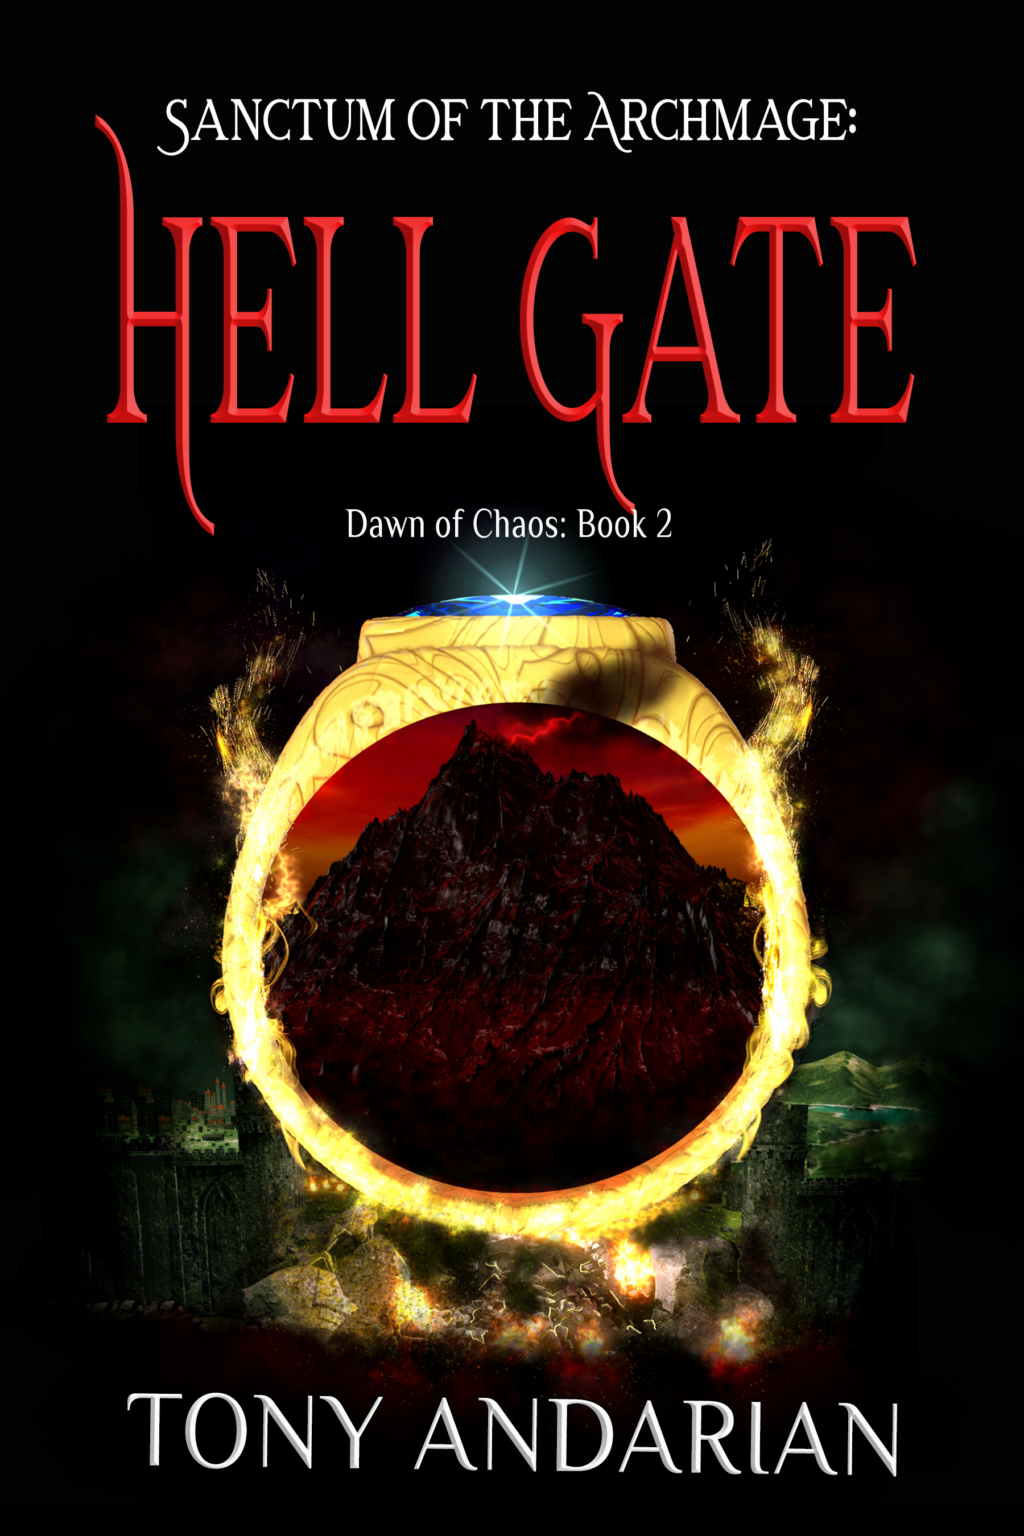 Cover Reveal - Hell Gate